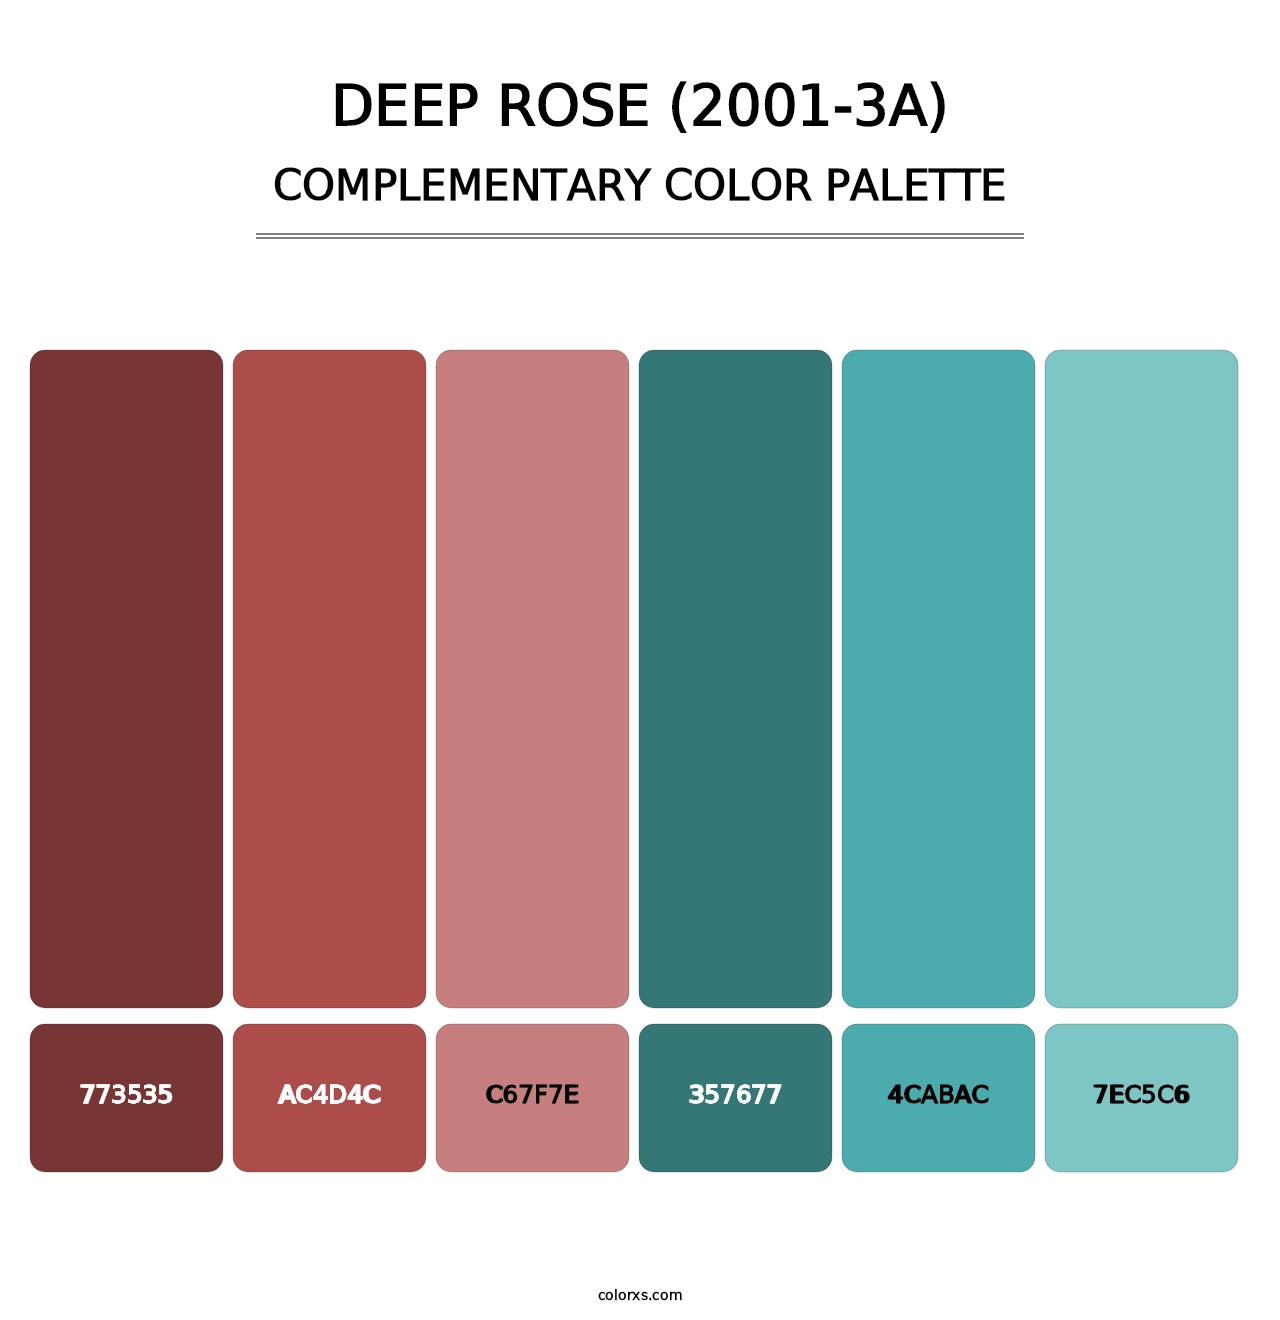 Deep Rose (2001-3A) - Complementary Color Palette